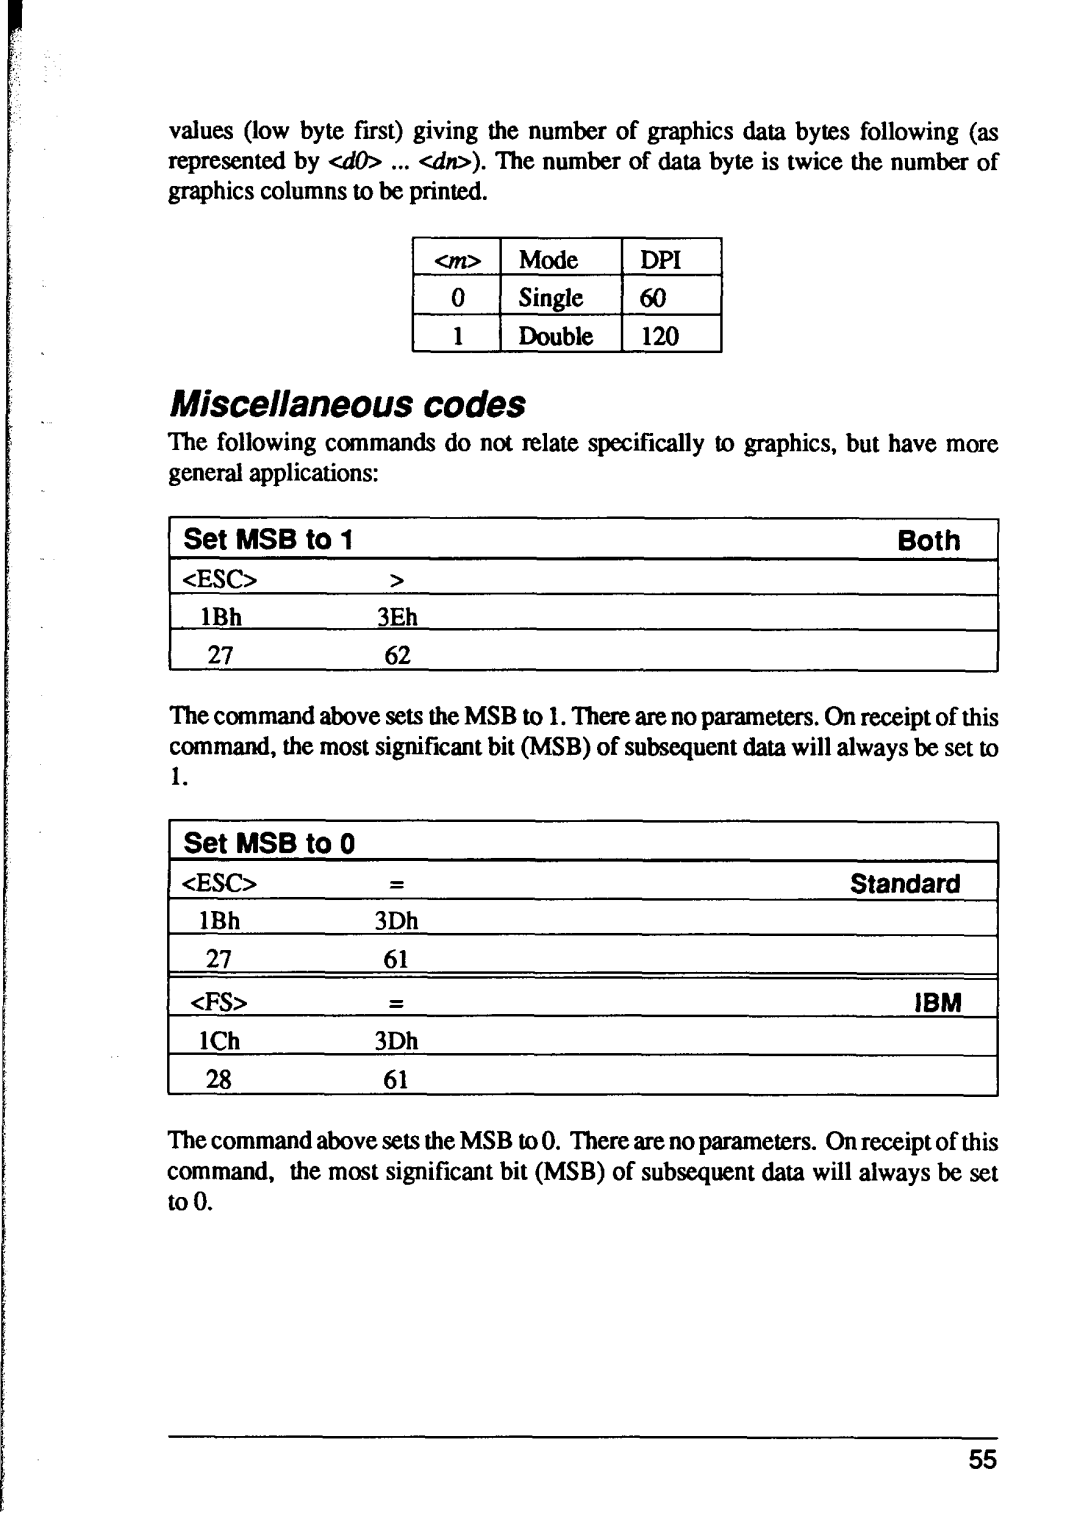 Star Micronics XR-1000, XR-1500 user manual Miscellaneous codes, 1Set MSB to, Both, Standard 